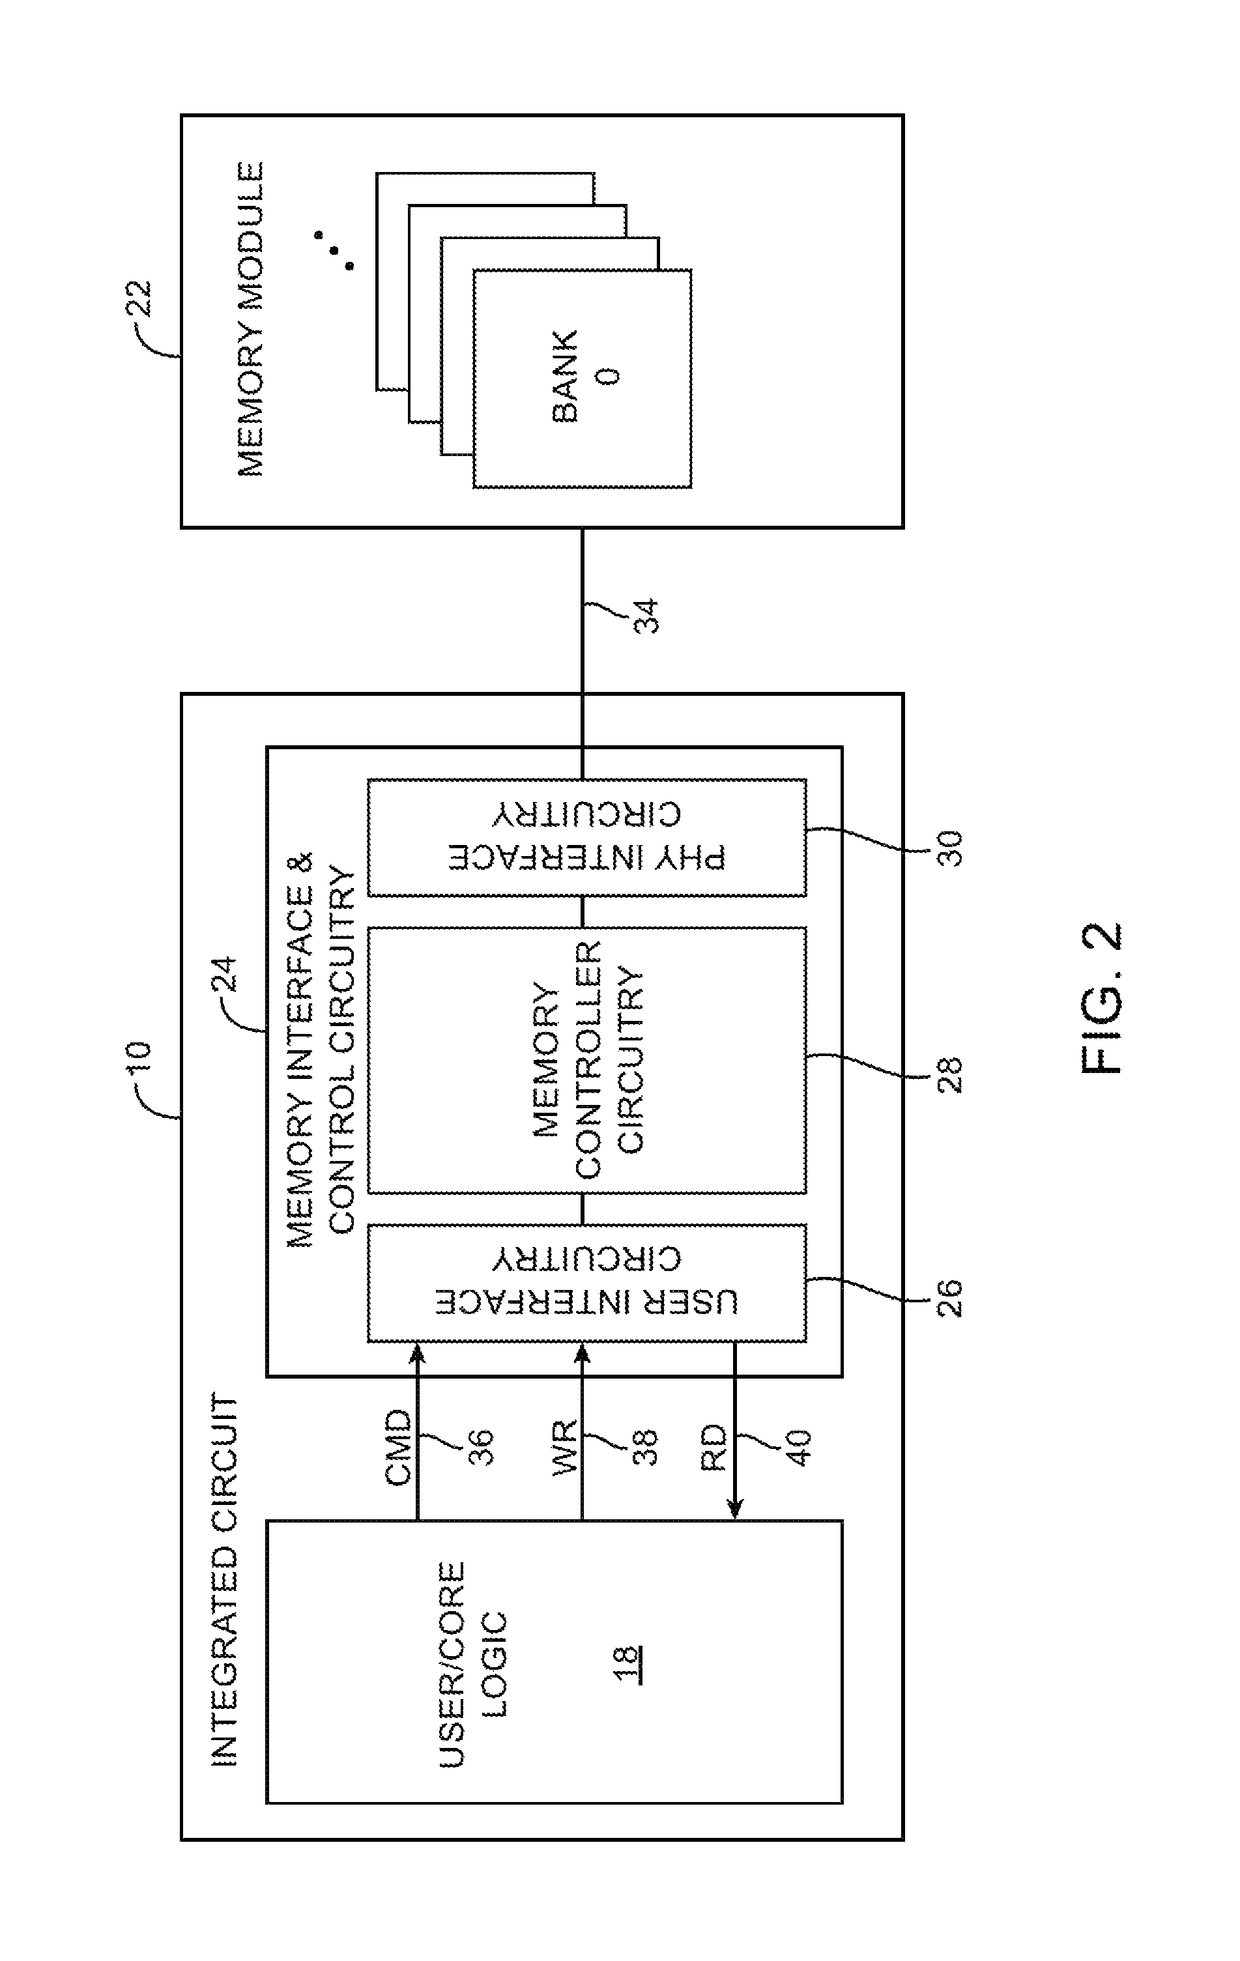 Memory controller architecture with improved memory scheduling efficiency